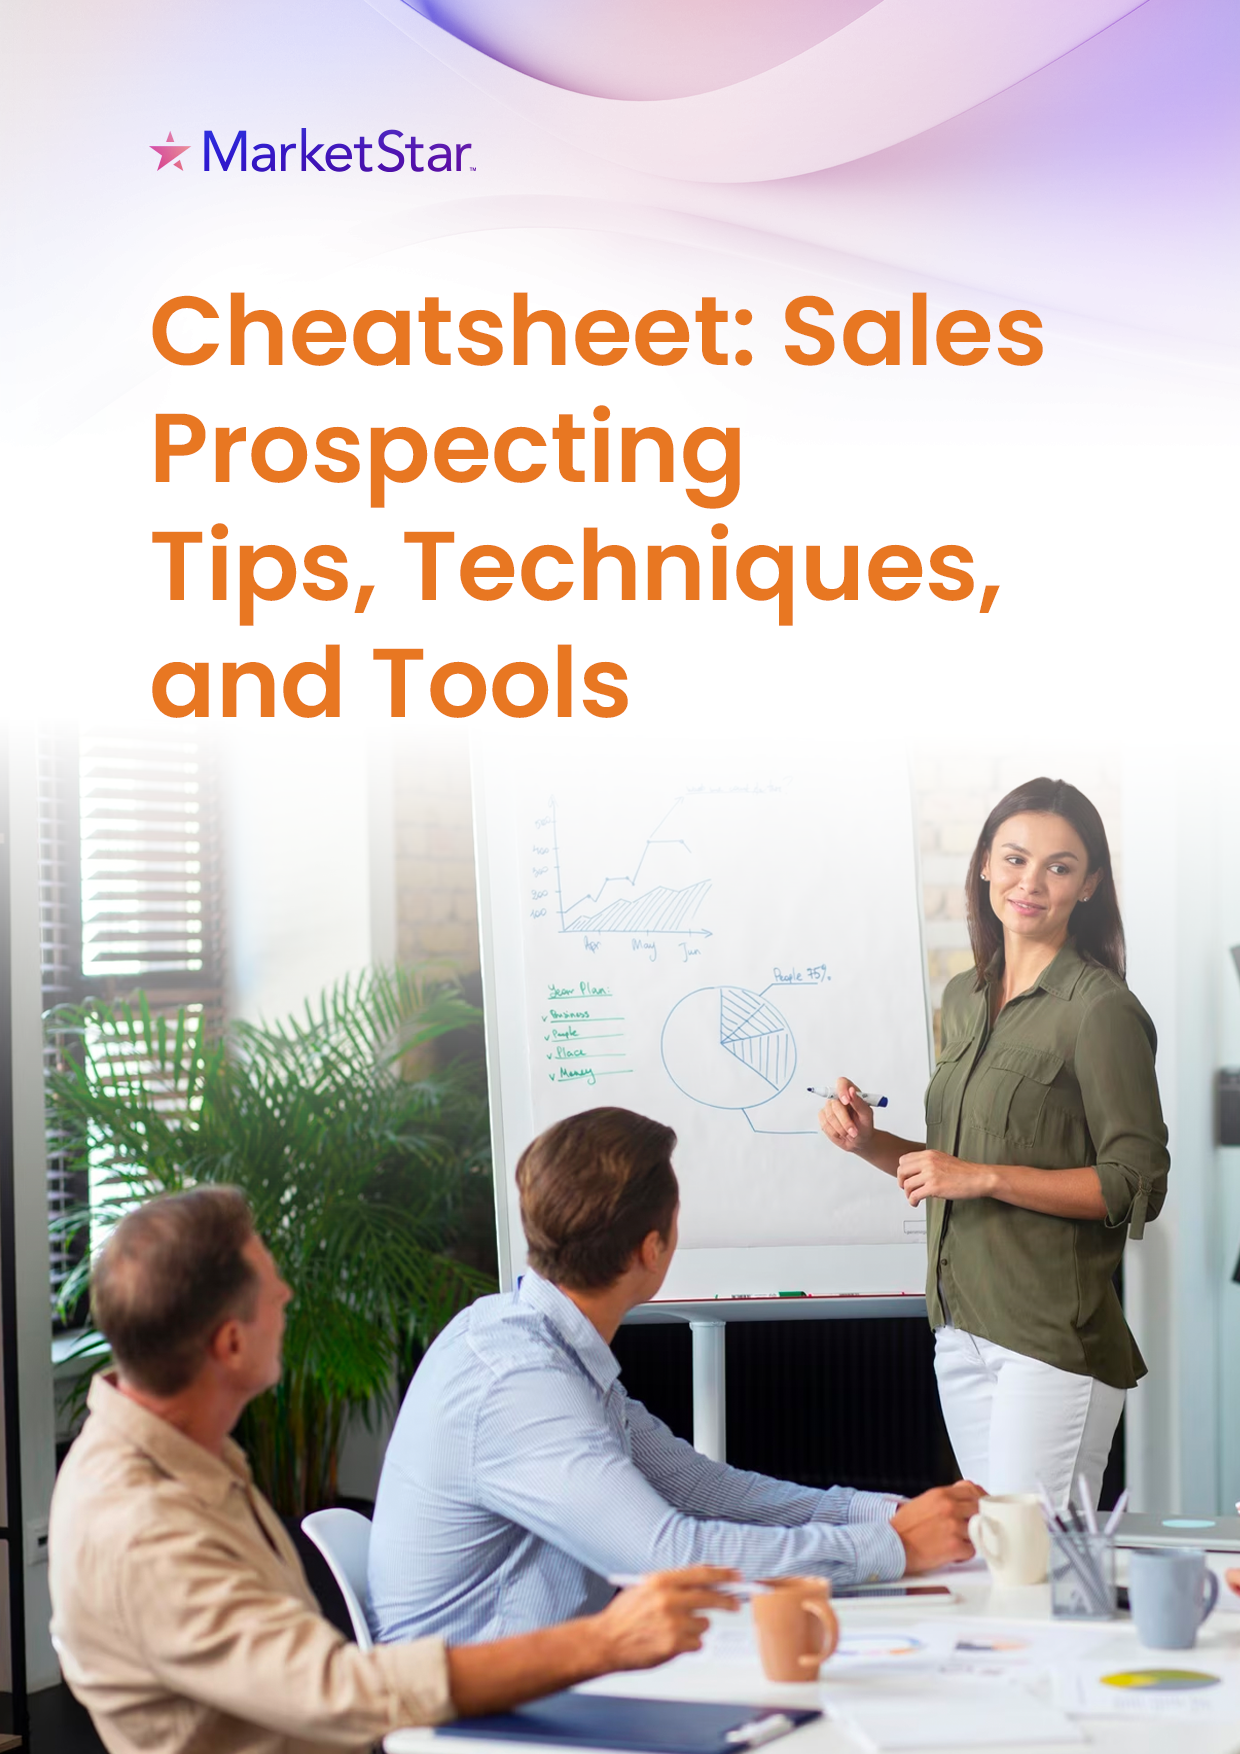 Sales Prospecting Tips, Techniques and Tools